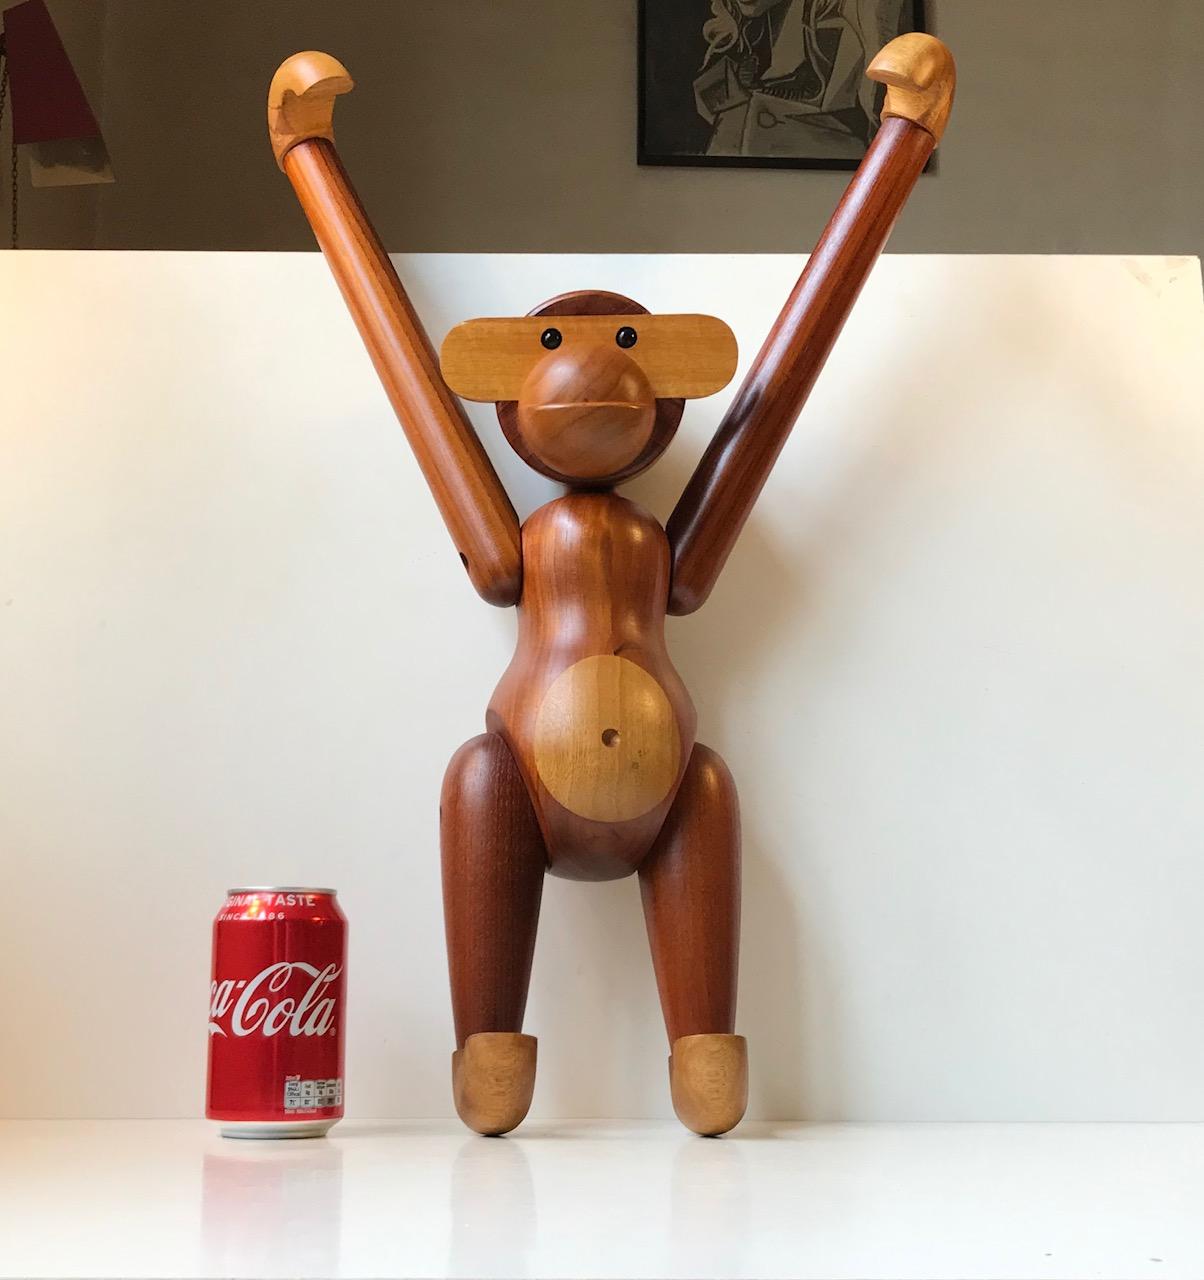 Iconic articulated teak and limba monkey designed by Kay Bojesen, Denmark. This is the large version measuring 58 cm/23 inches when standing fully articulated. It was designed in 1952 this one is an example from the 1980s. Very good vintage